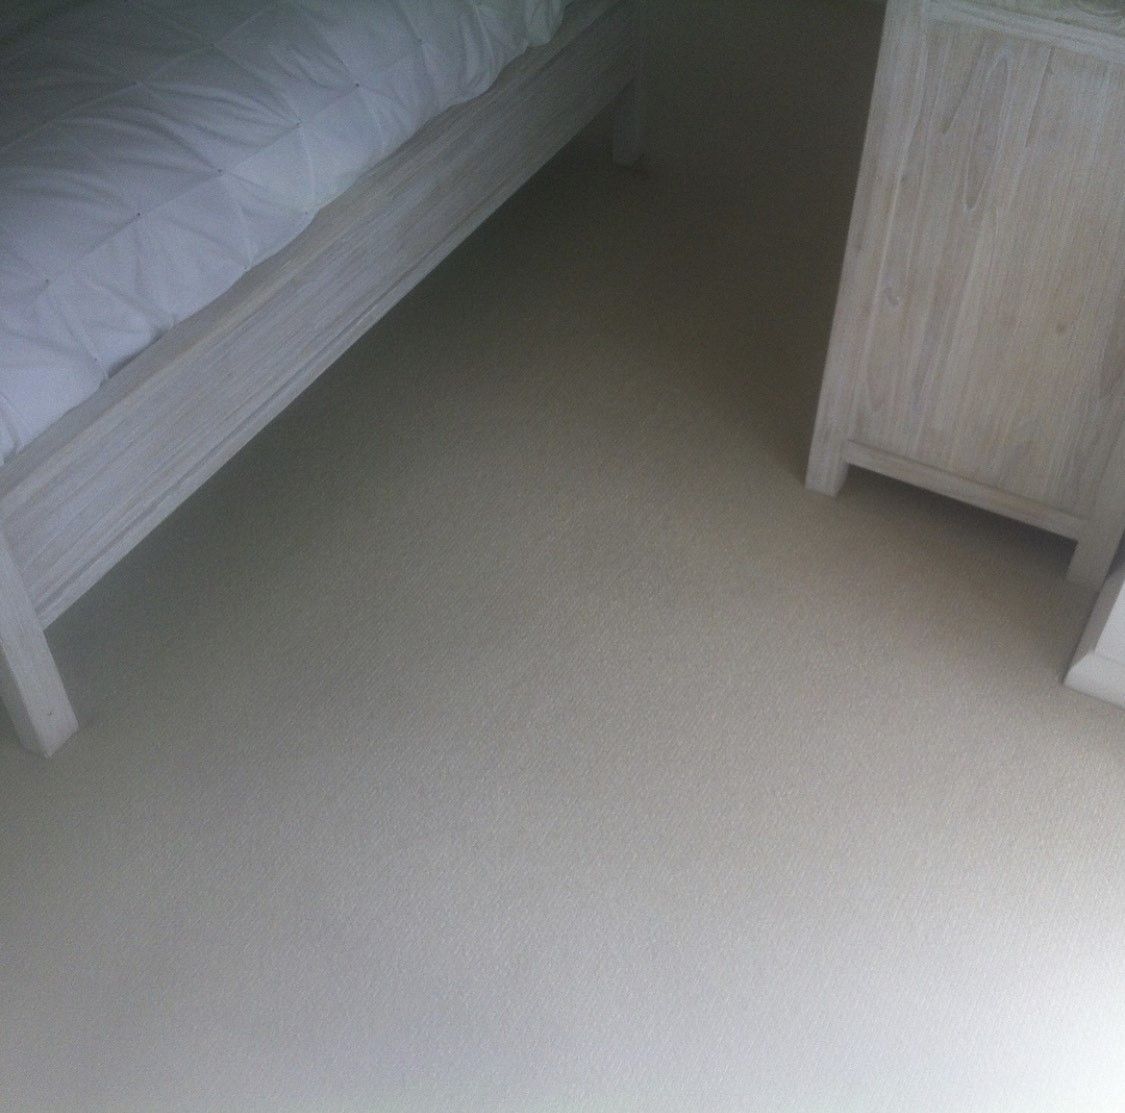 After Carpet Cleaning — Carpet Cleaning in Anna Bay, NSW